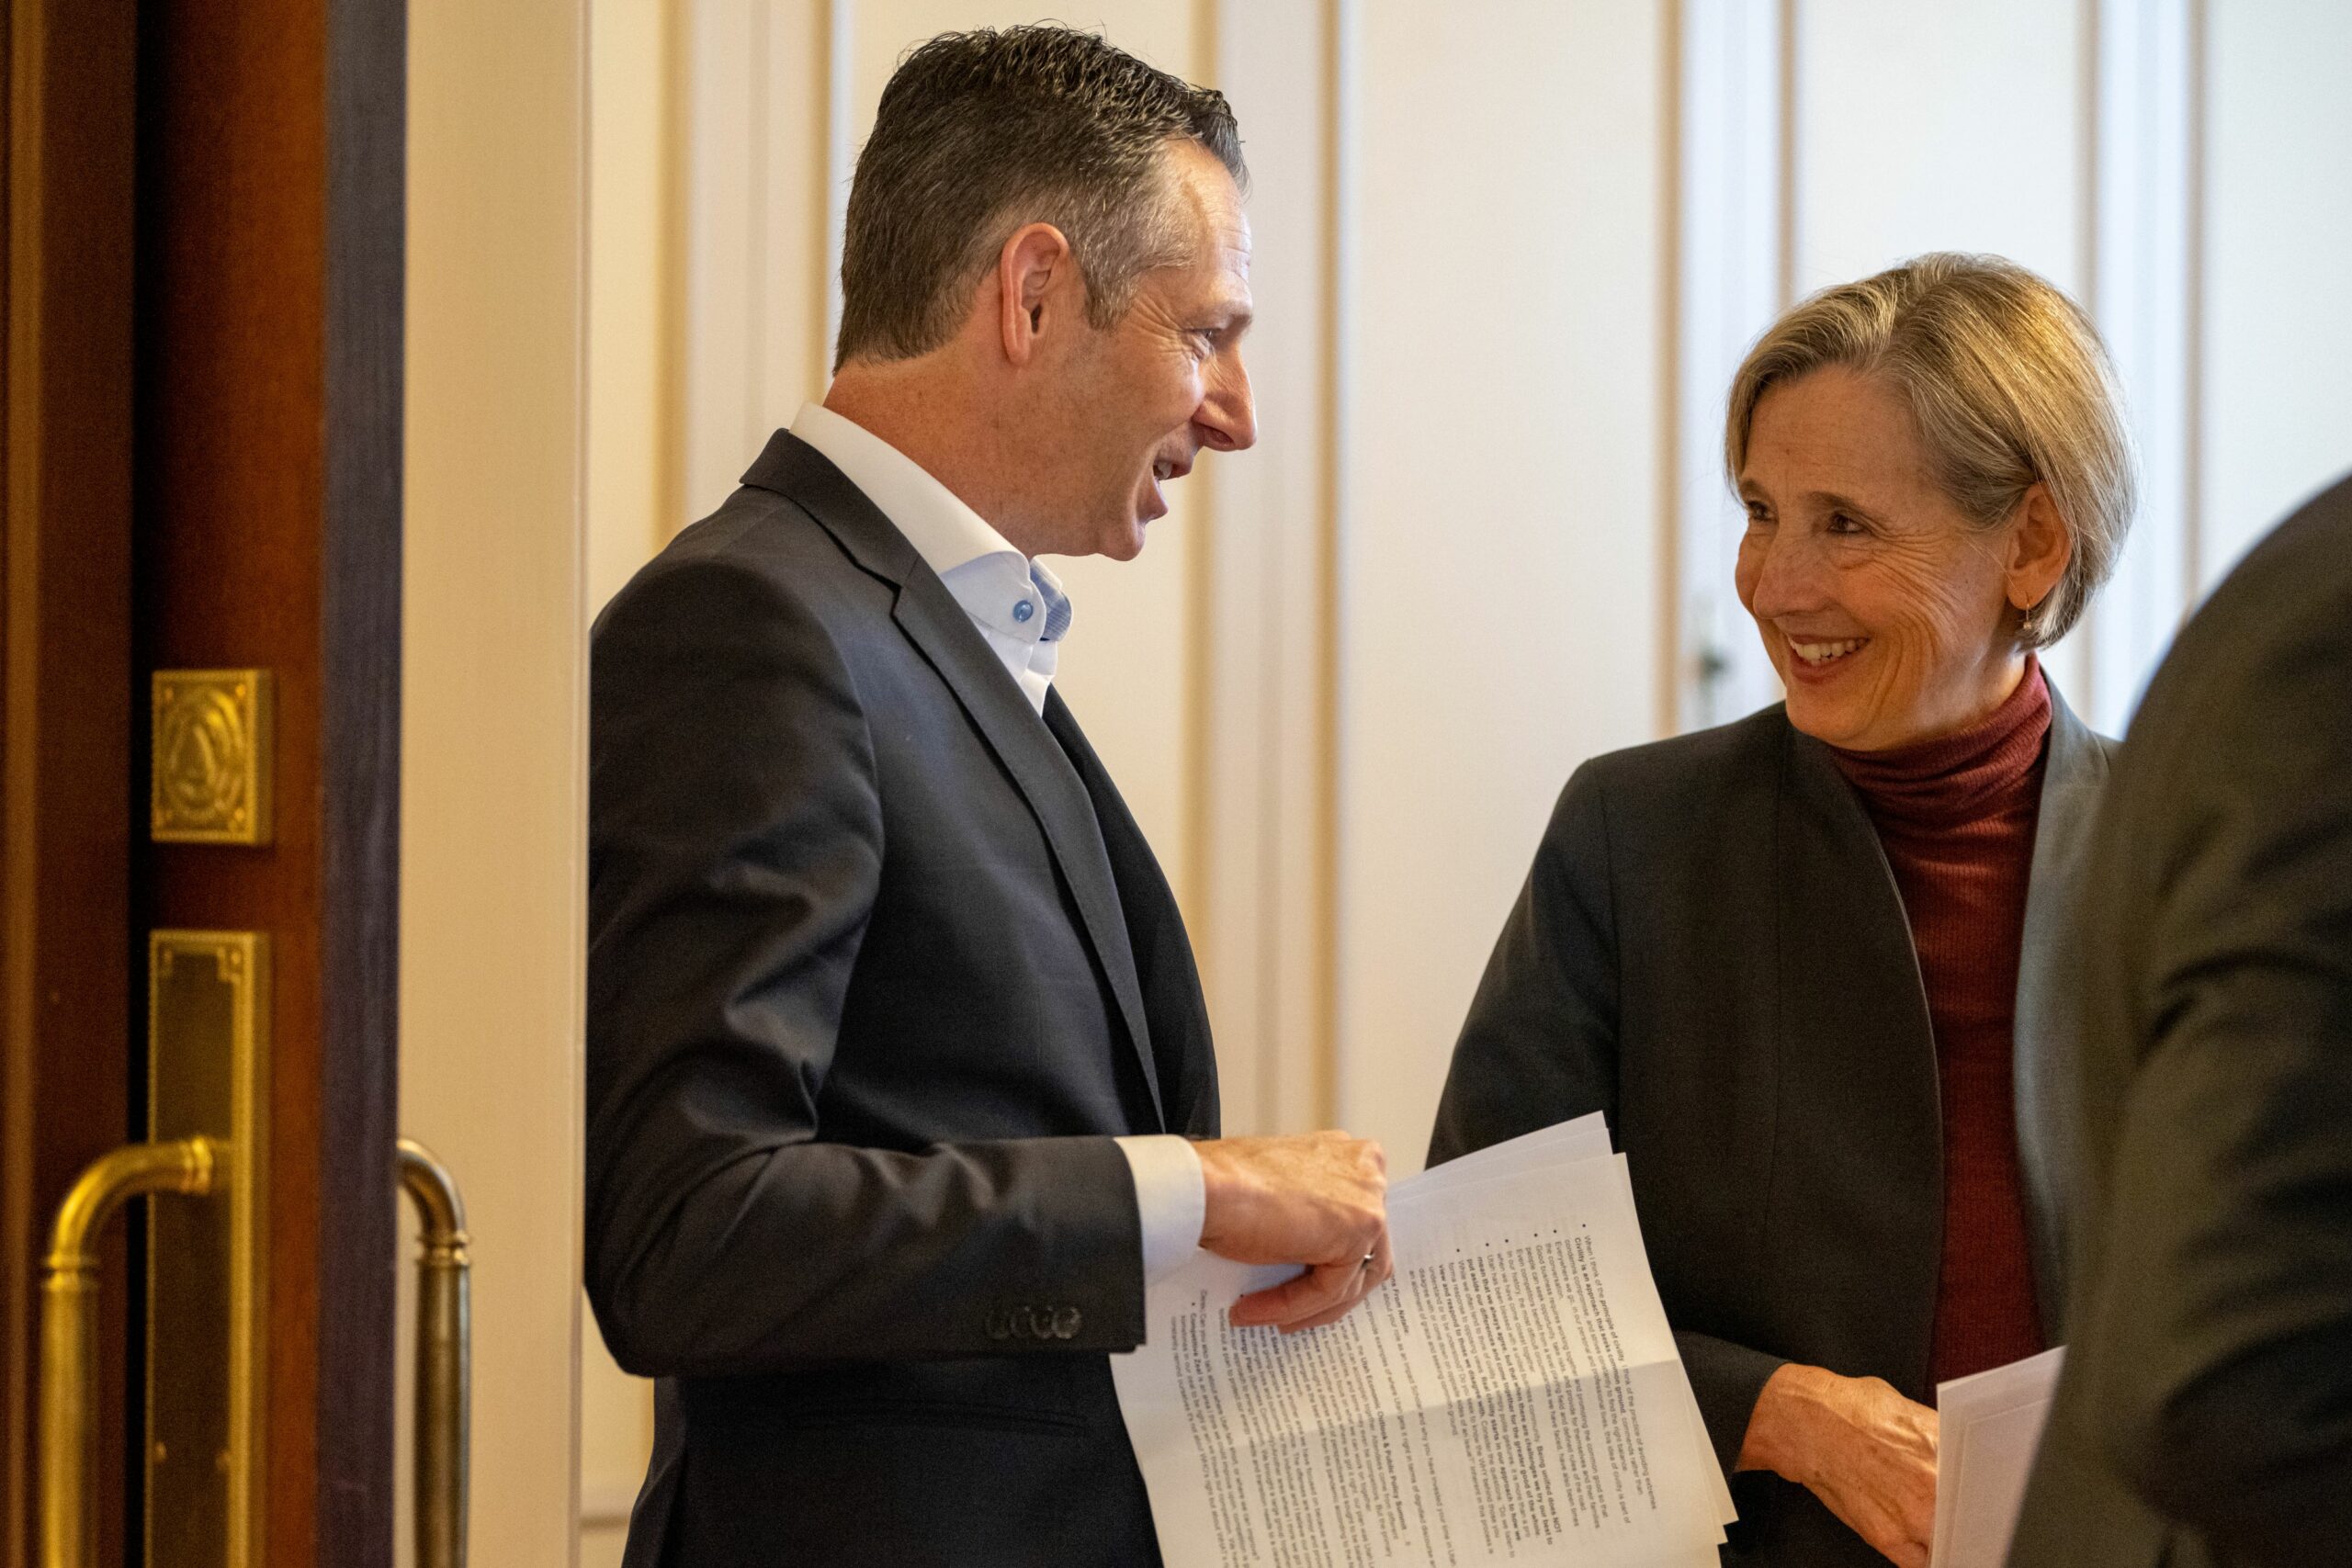 Opposites attract—and often come together to make the best decisions for Utah when both women and men are in leadership roles.